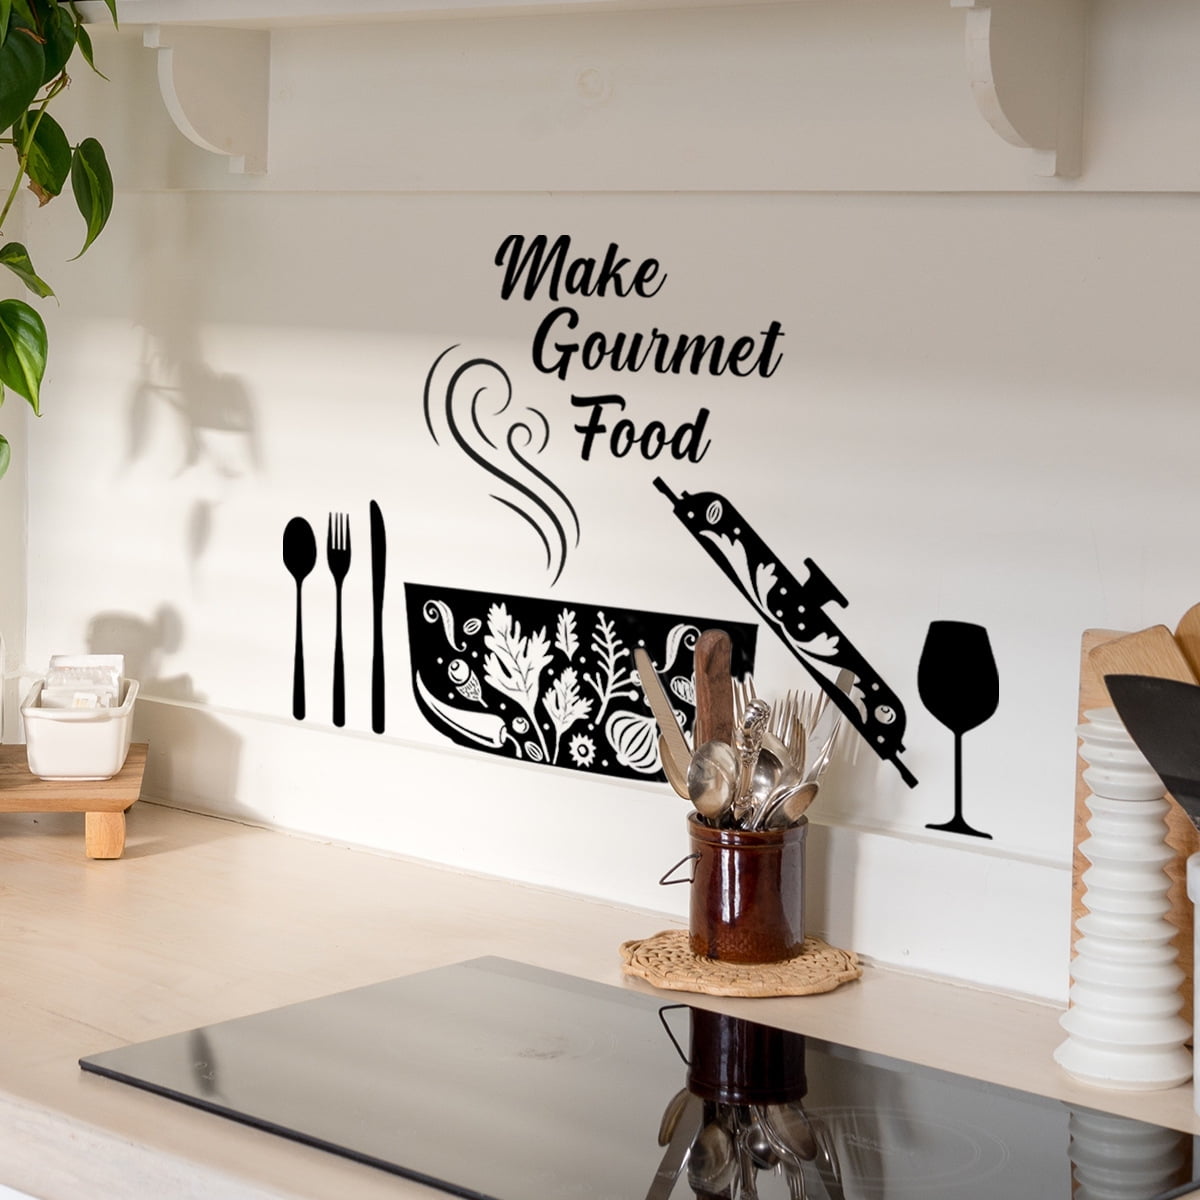 In-Style Decals Wall Vinyl Decal Home Decor Art Sticker Food Word Sign  Spoon Kitchen Restaurant Café Room Removable Stylish Mural Unique Design  1499